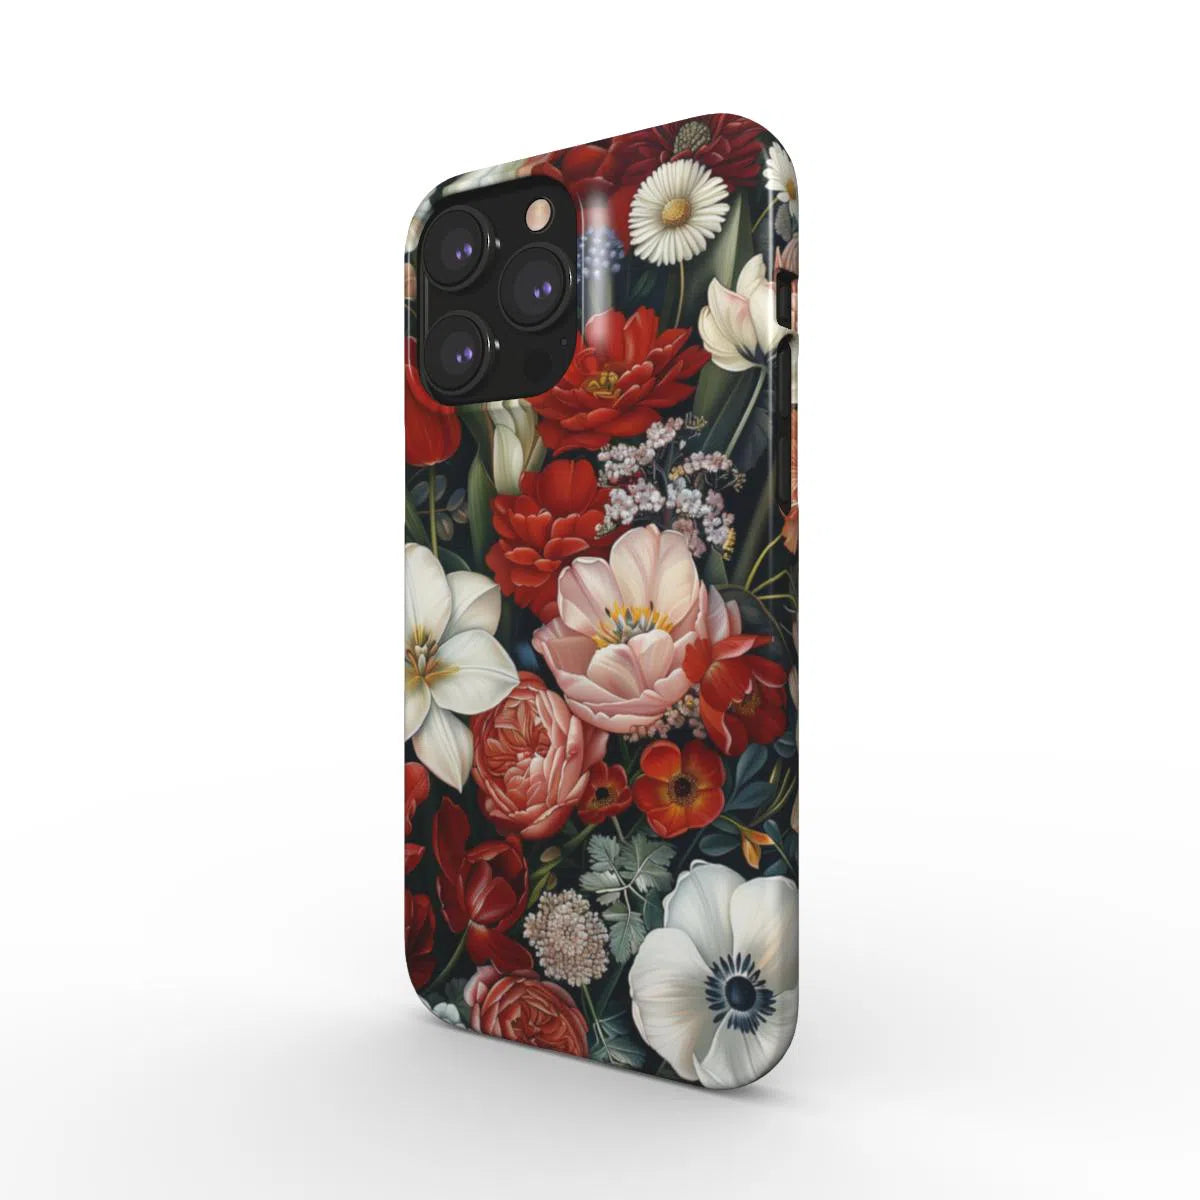 Blooming Harmony: The Ultimate Floral Snap Phone Case – Nature's Elegance